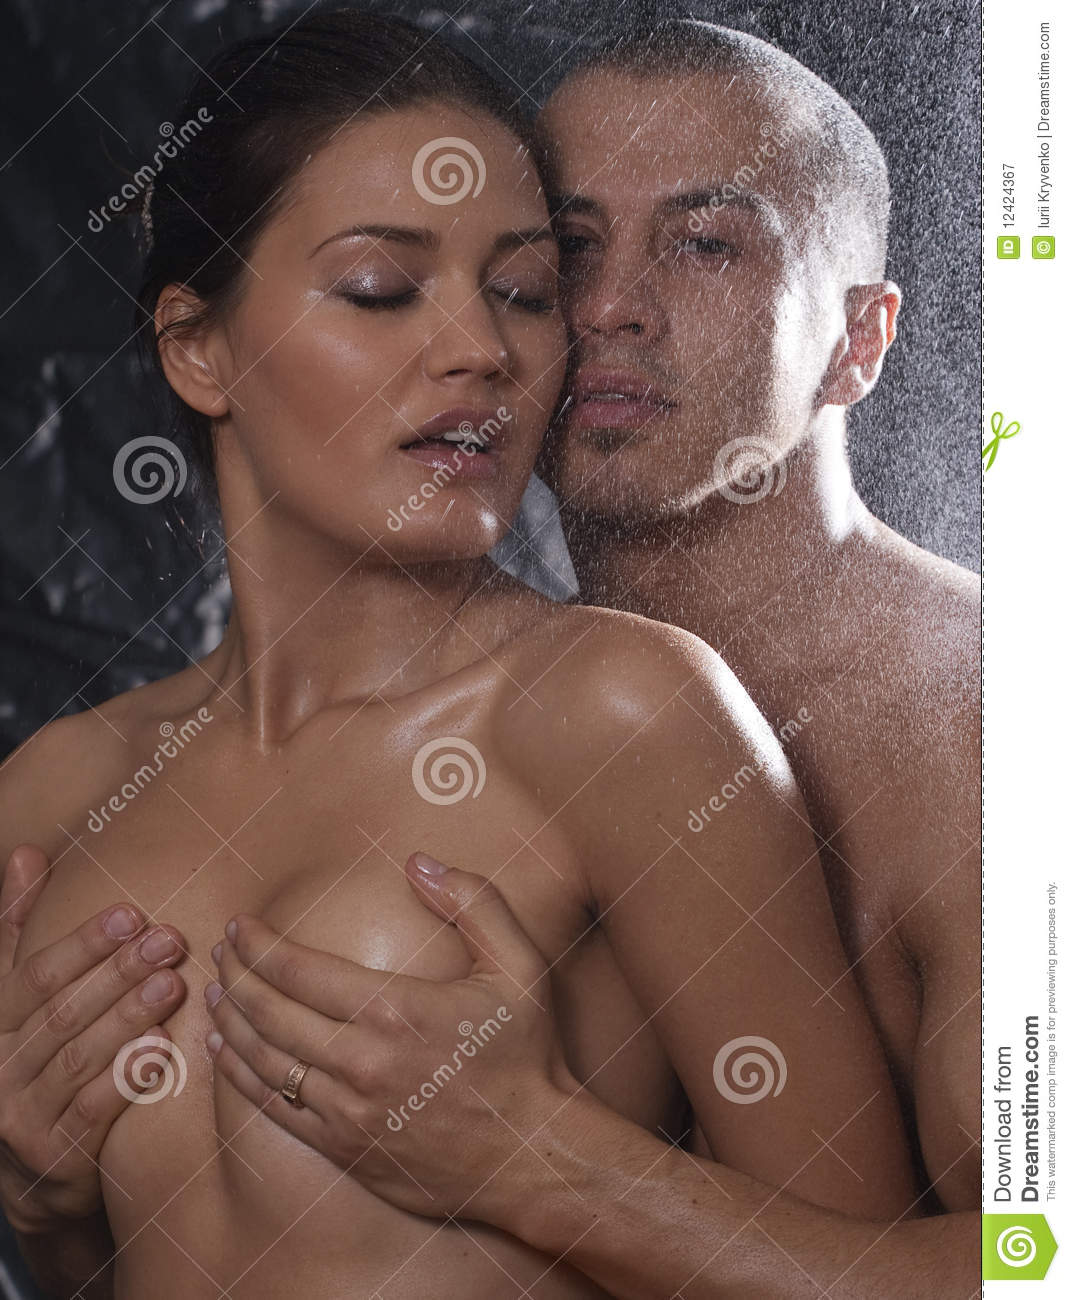 New Y. reccomend Holding boobs in shower